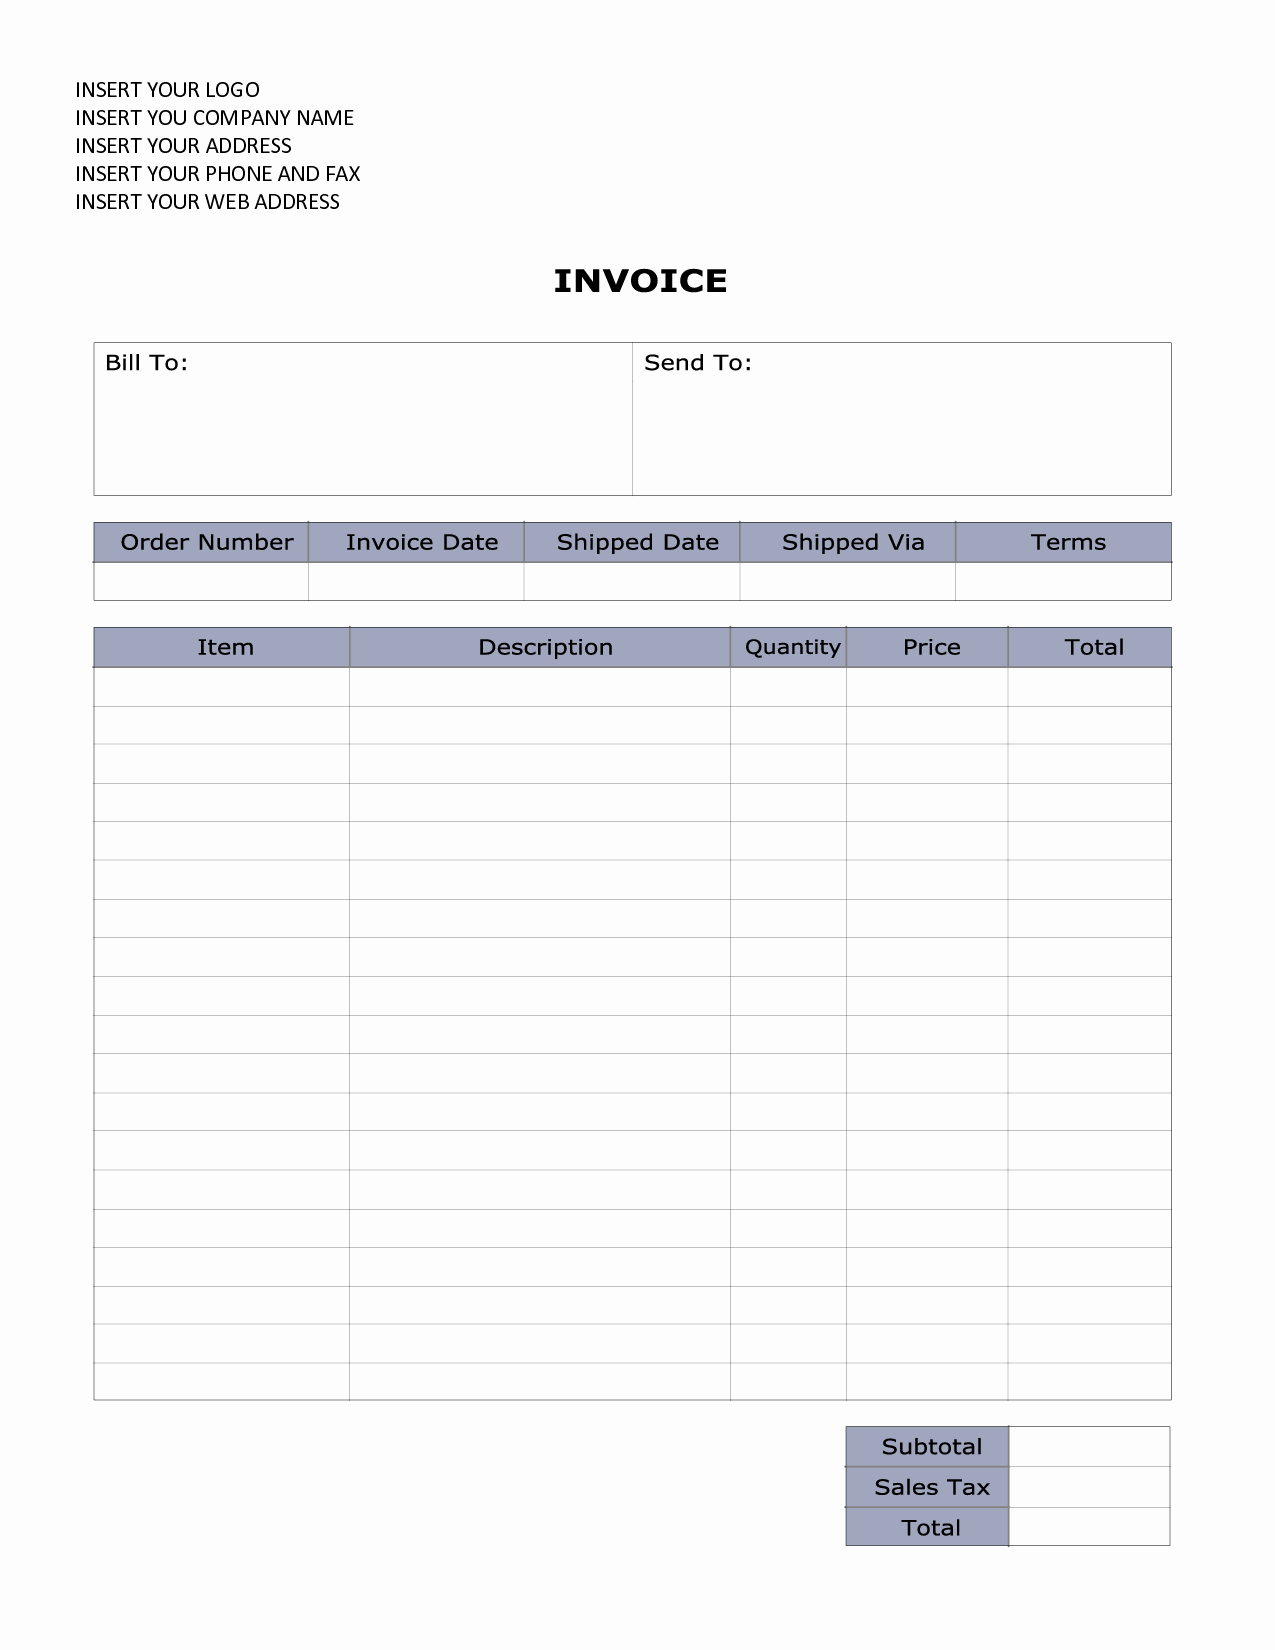 Create Invoice Template In Word Elegant Invoice Template Word 2010